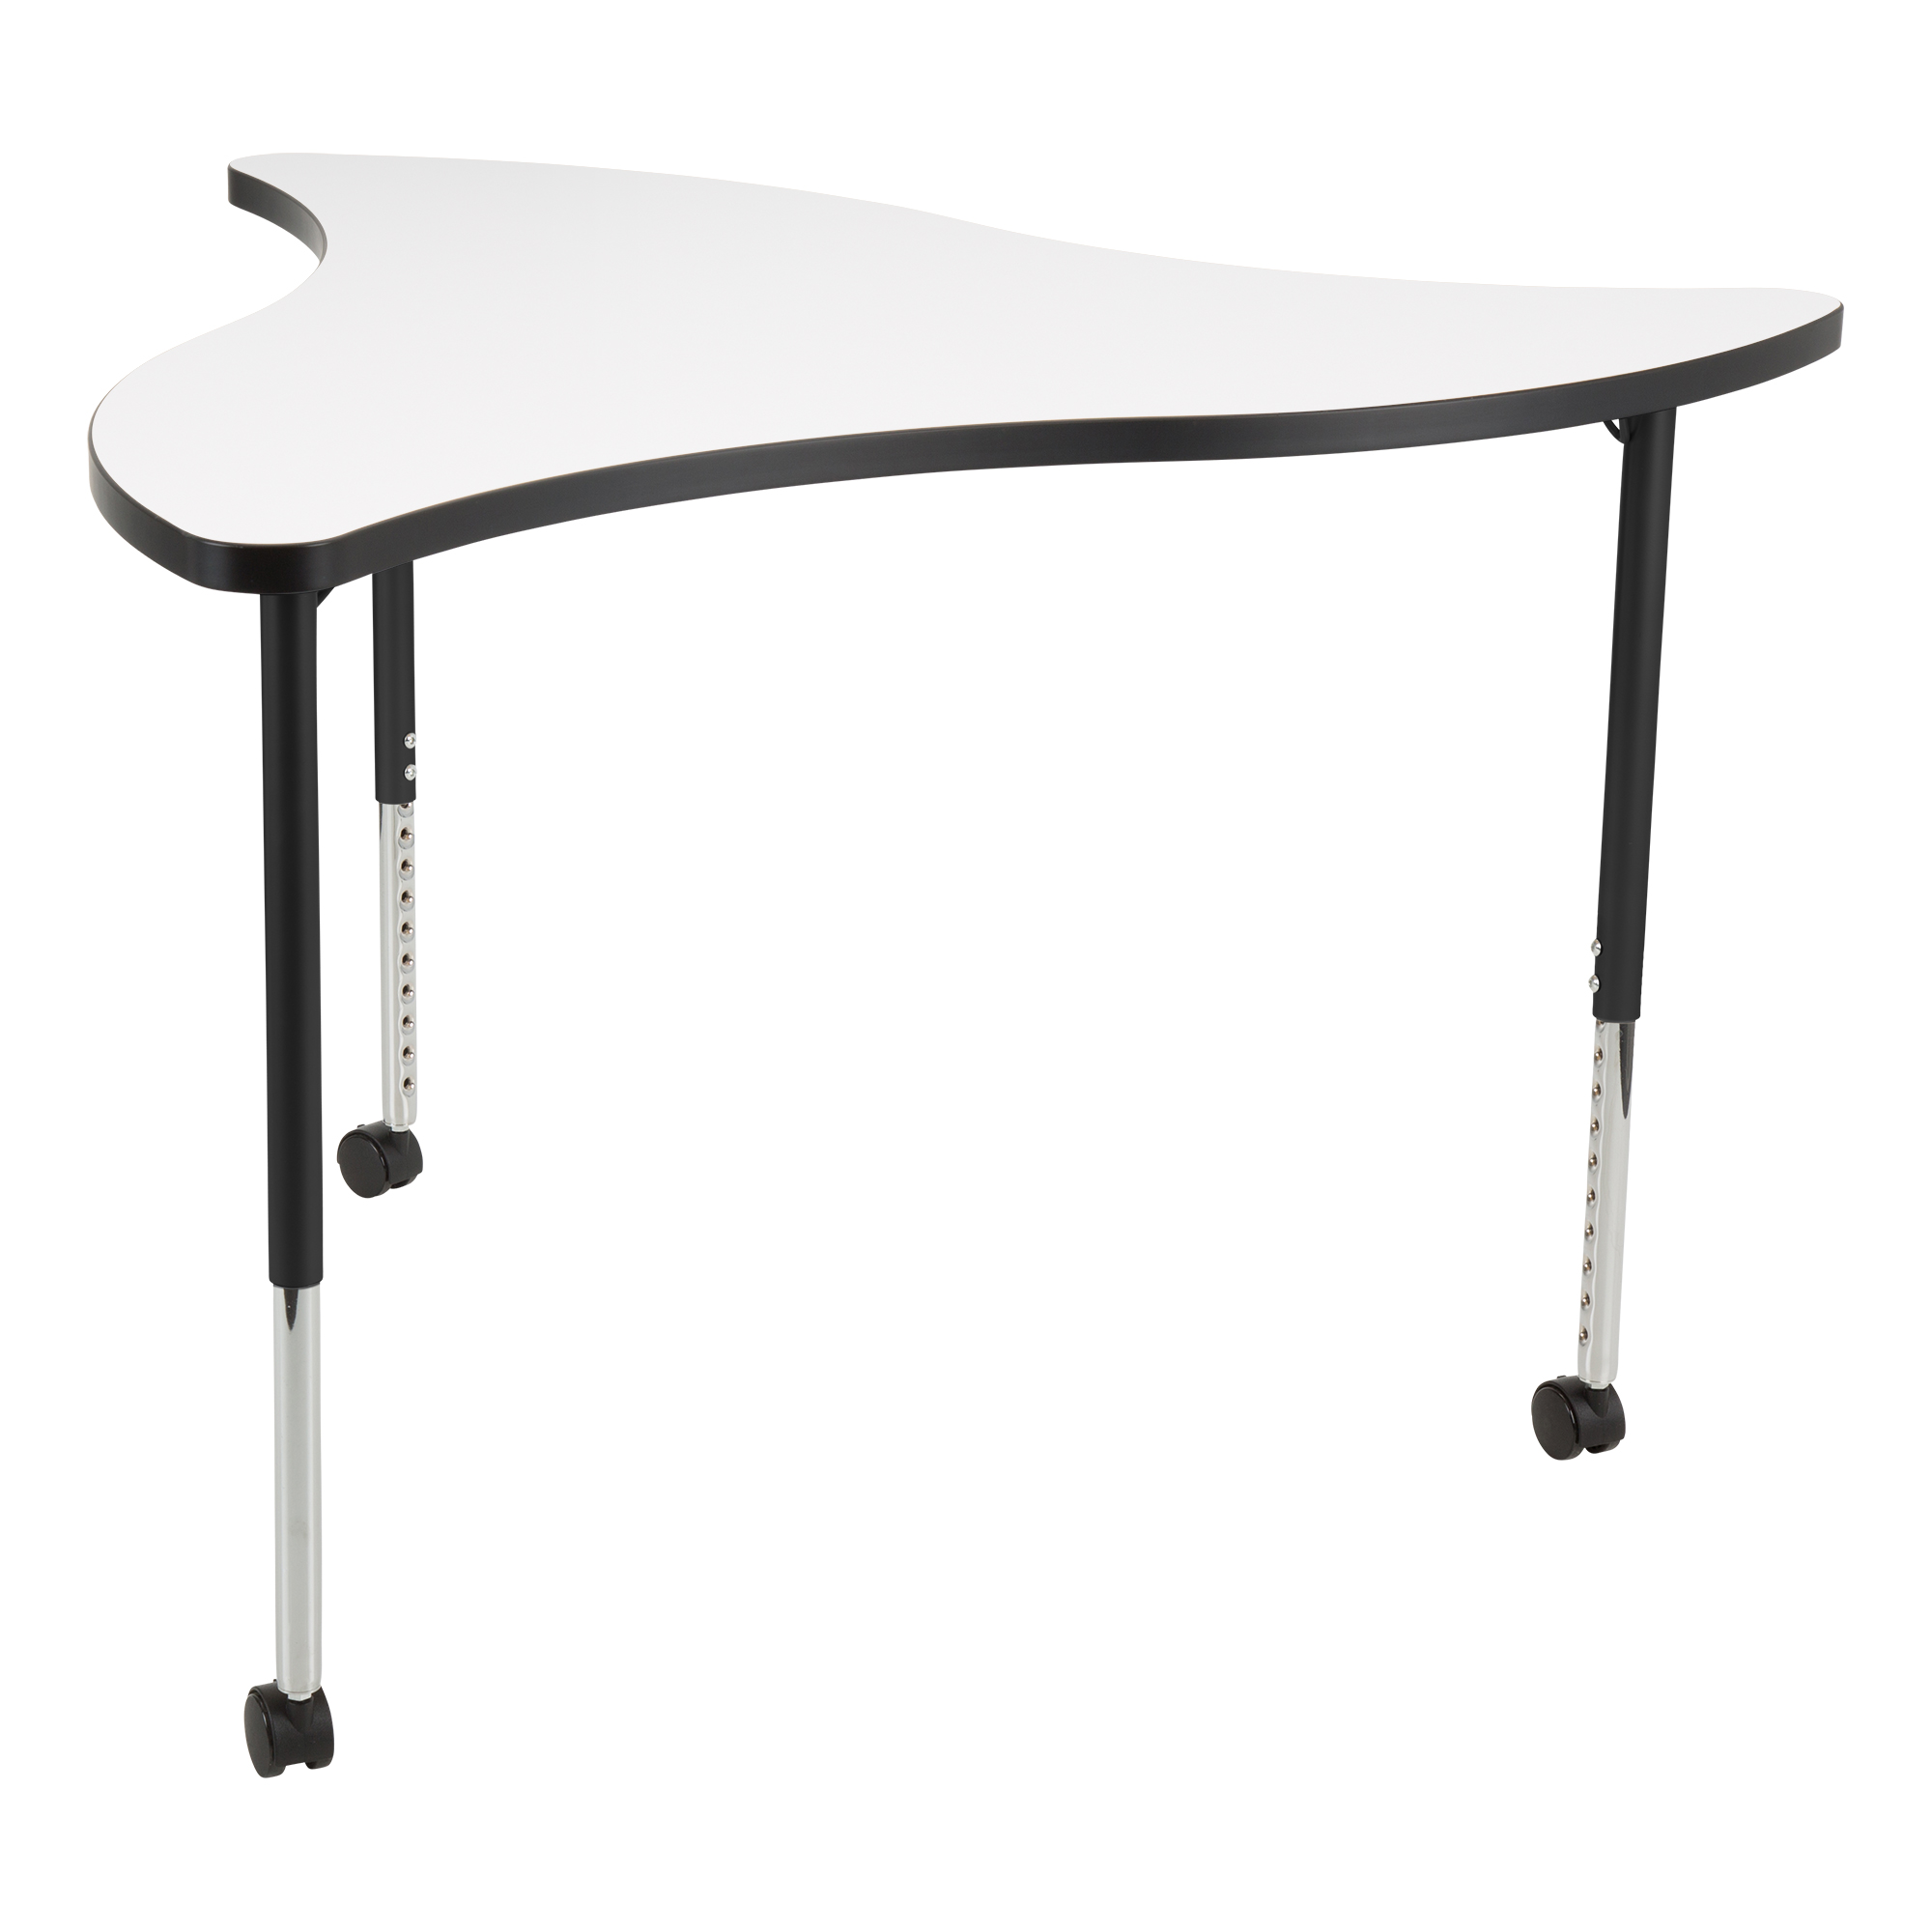 Learniture Structure Series Mobile Wave Collaborative Adjustable Height Table 